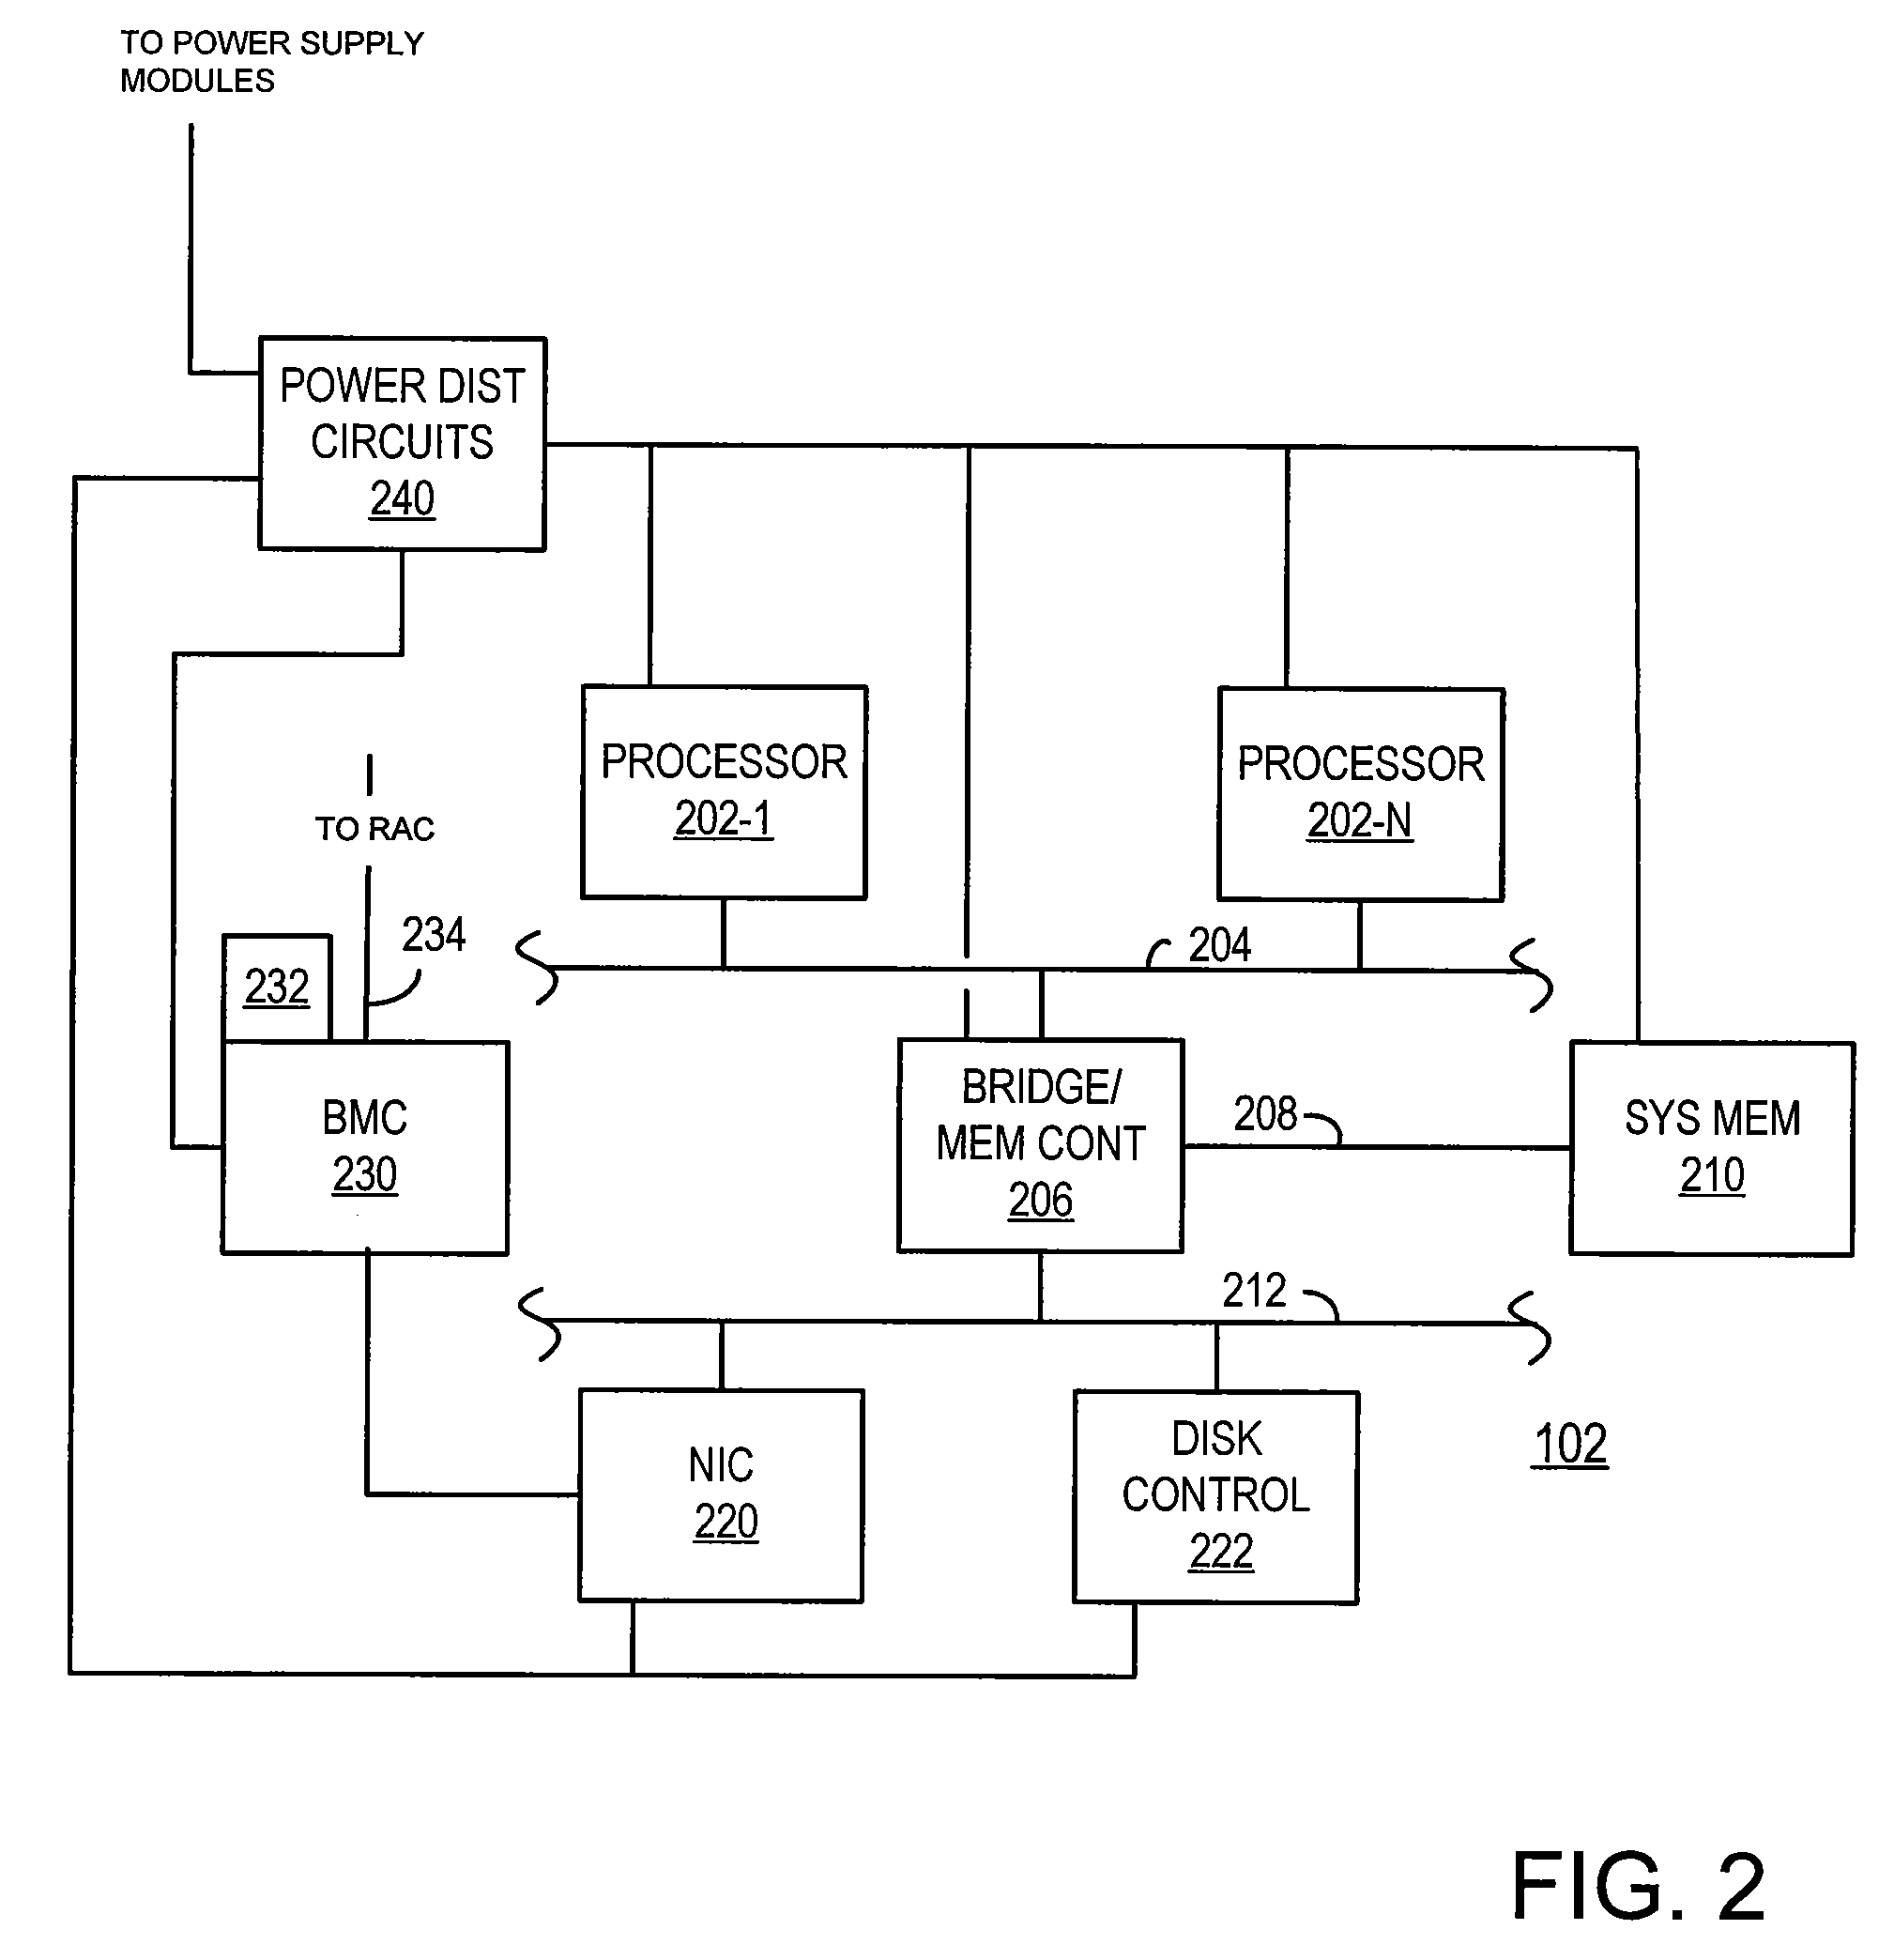 Power profiling application for managing power allocation in an information handling system